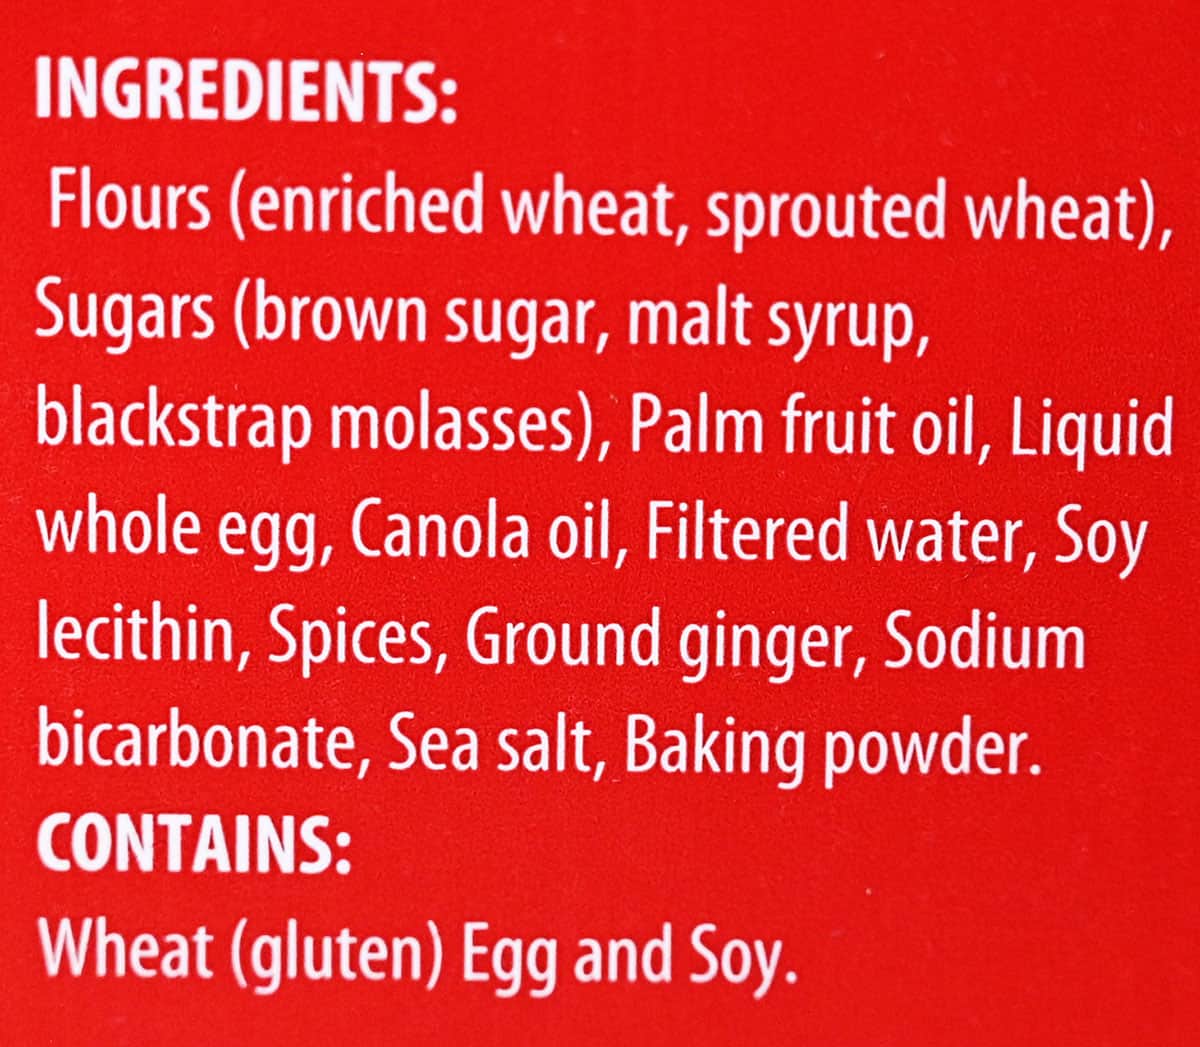 Ingredients label for the gingerbread cookies.